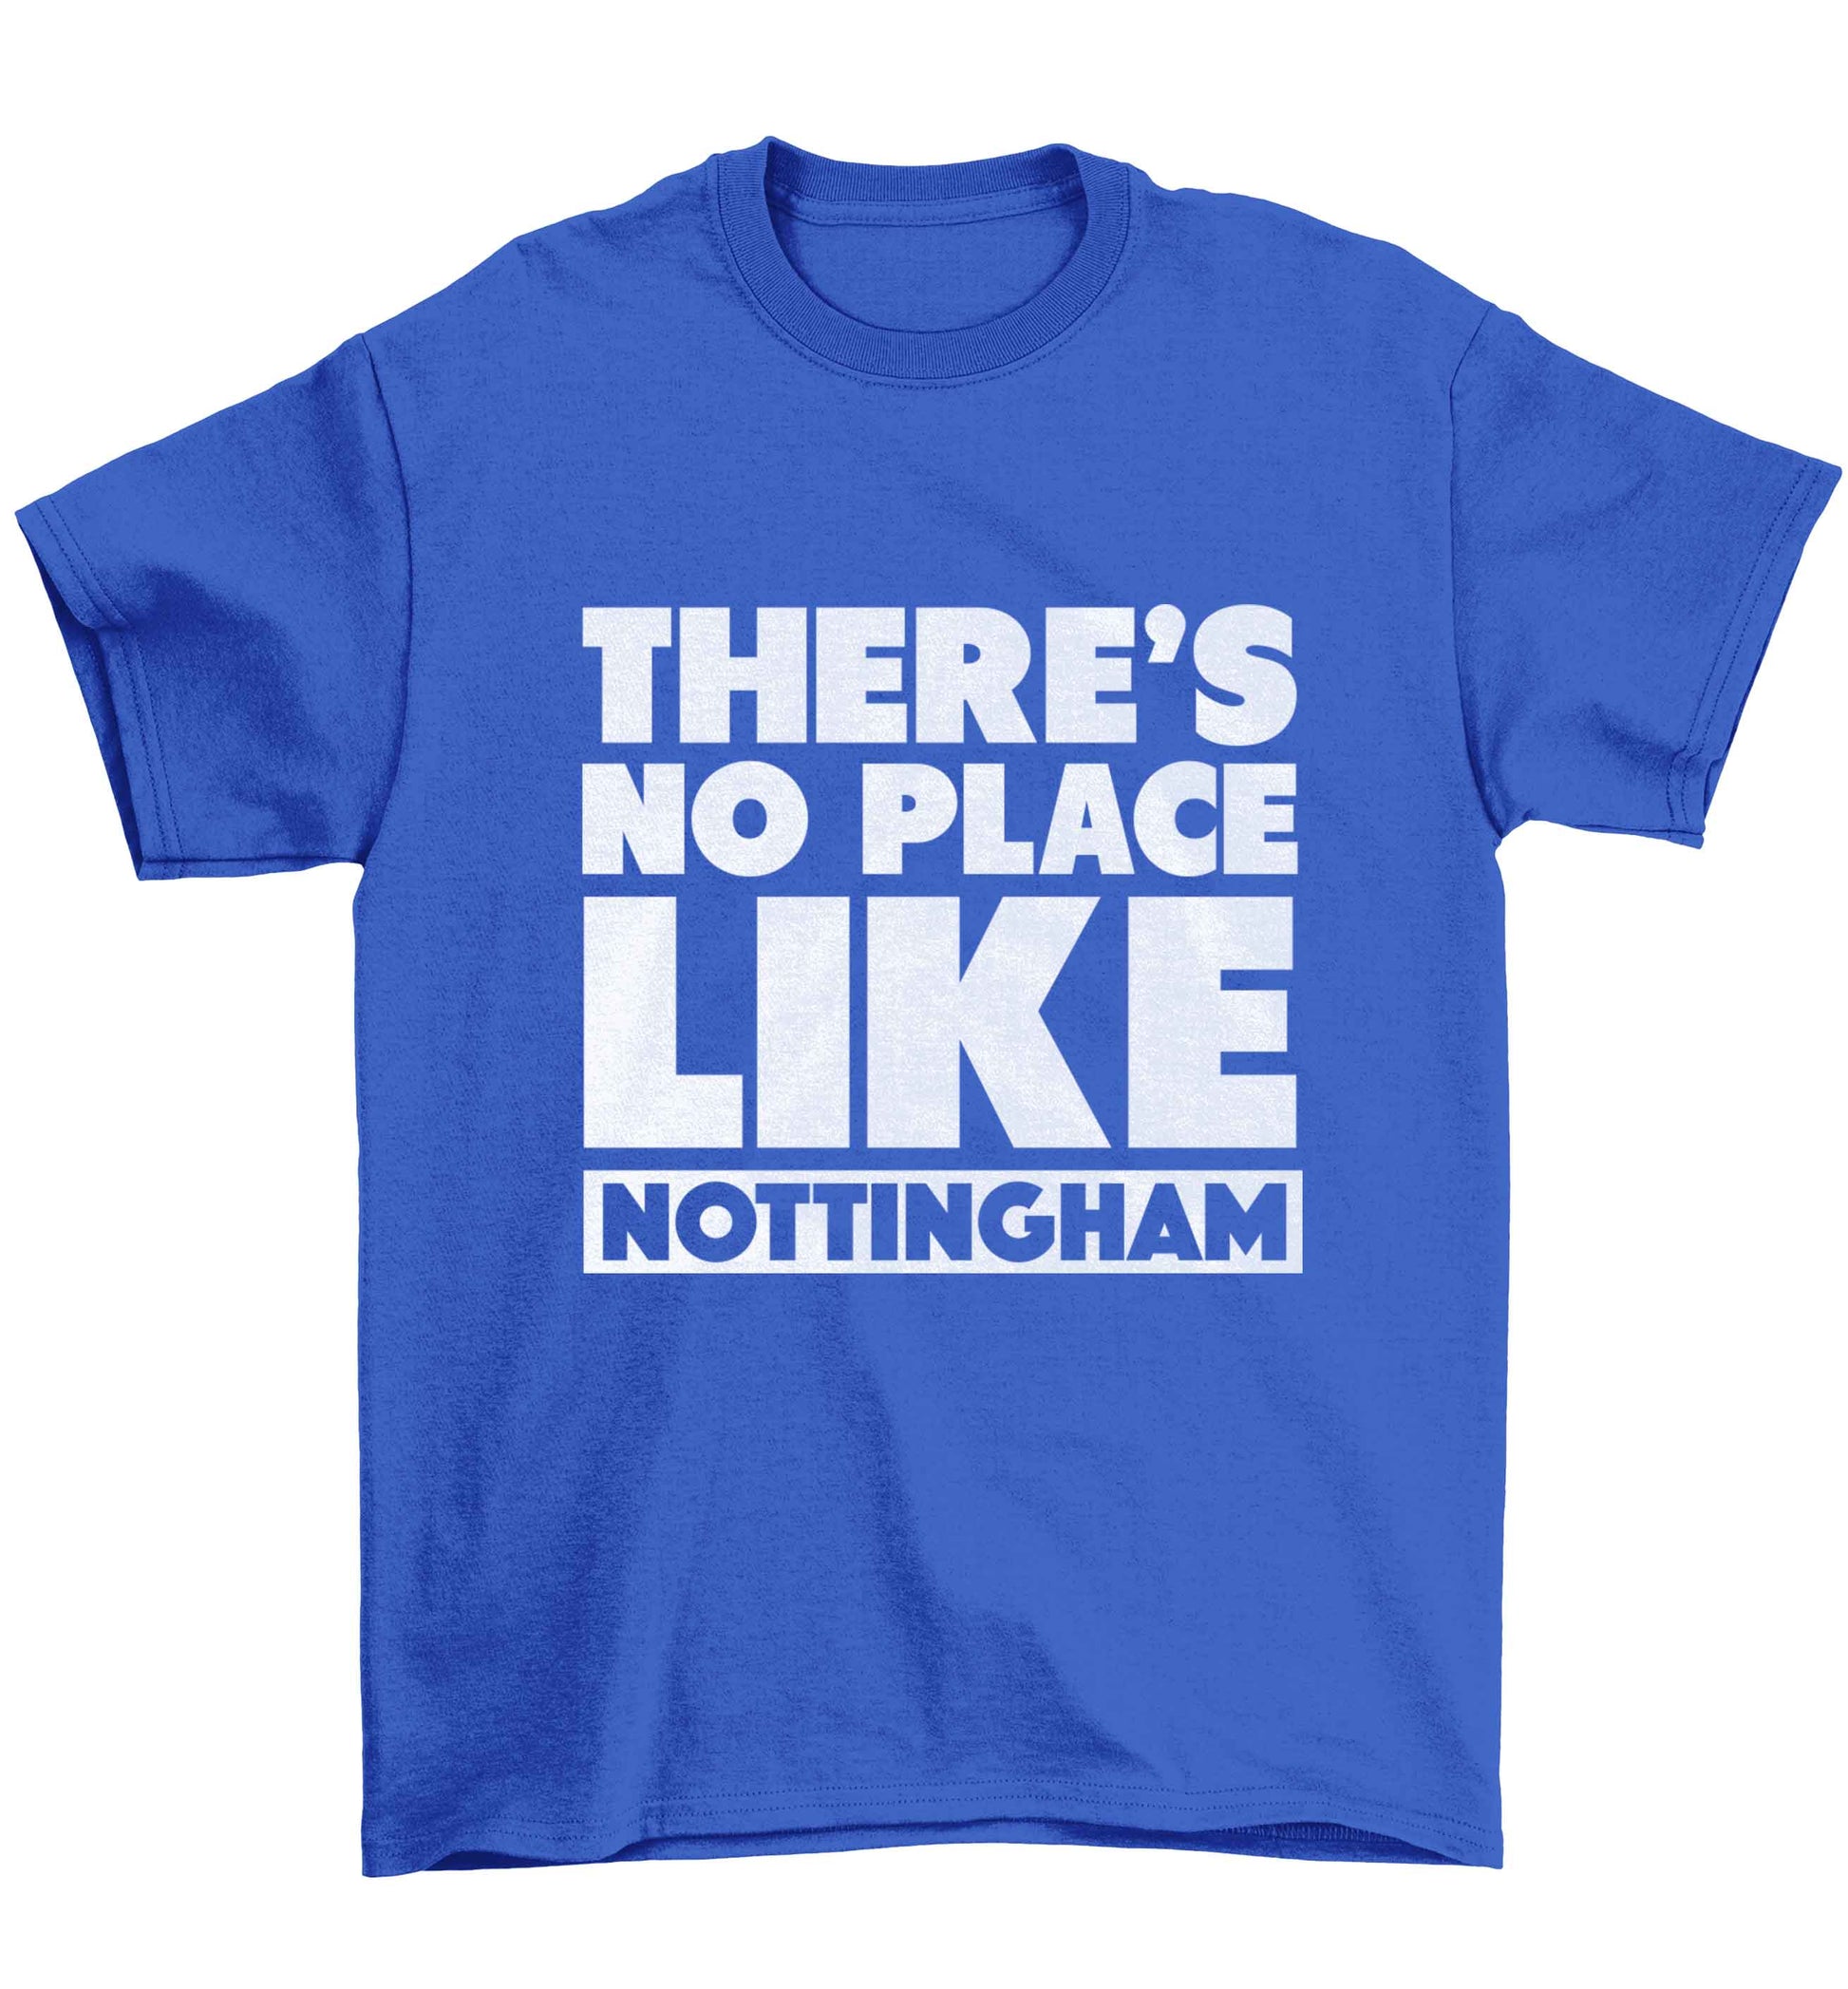 There's no place like Nottingham Children's blue Tshirt 12-13 Years